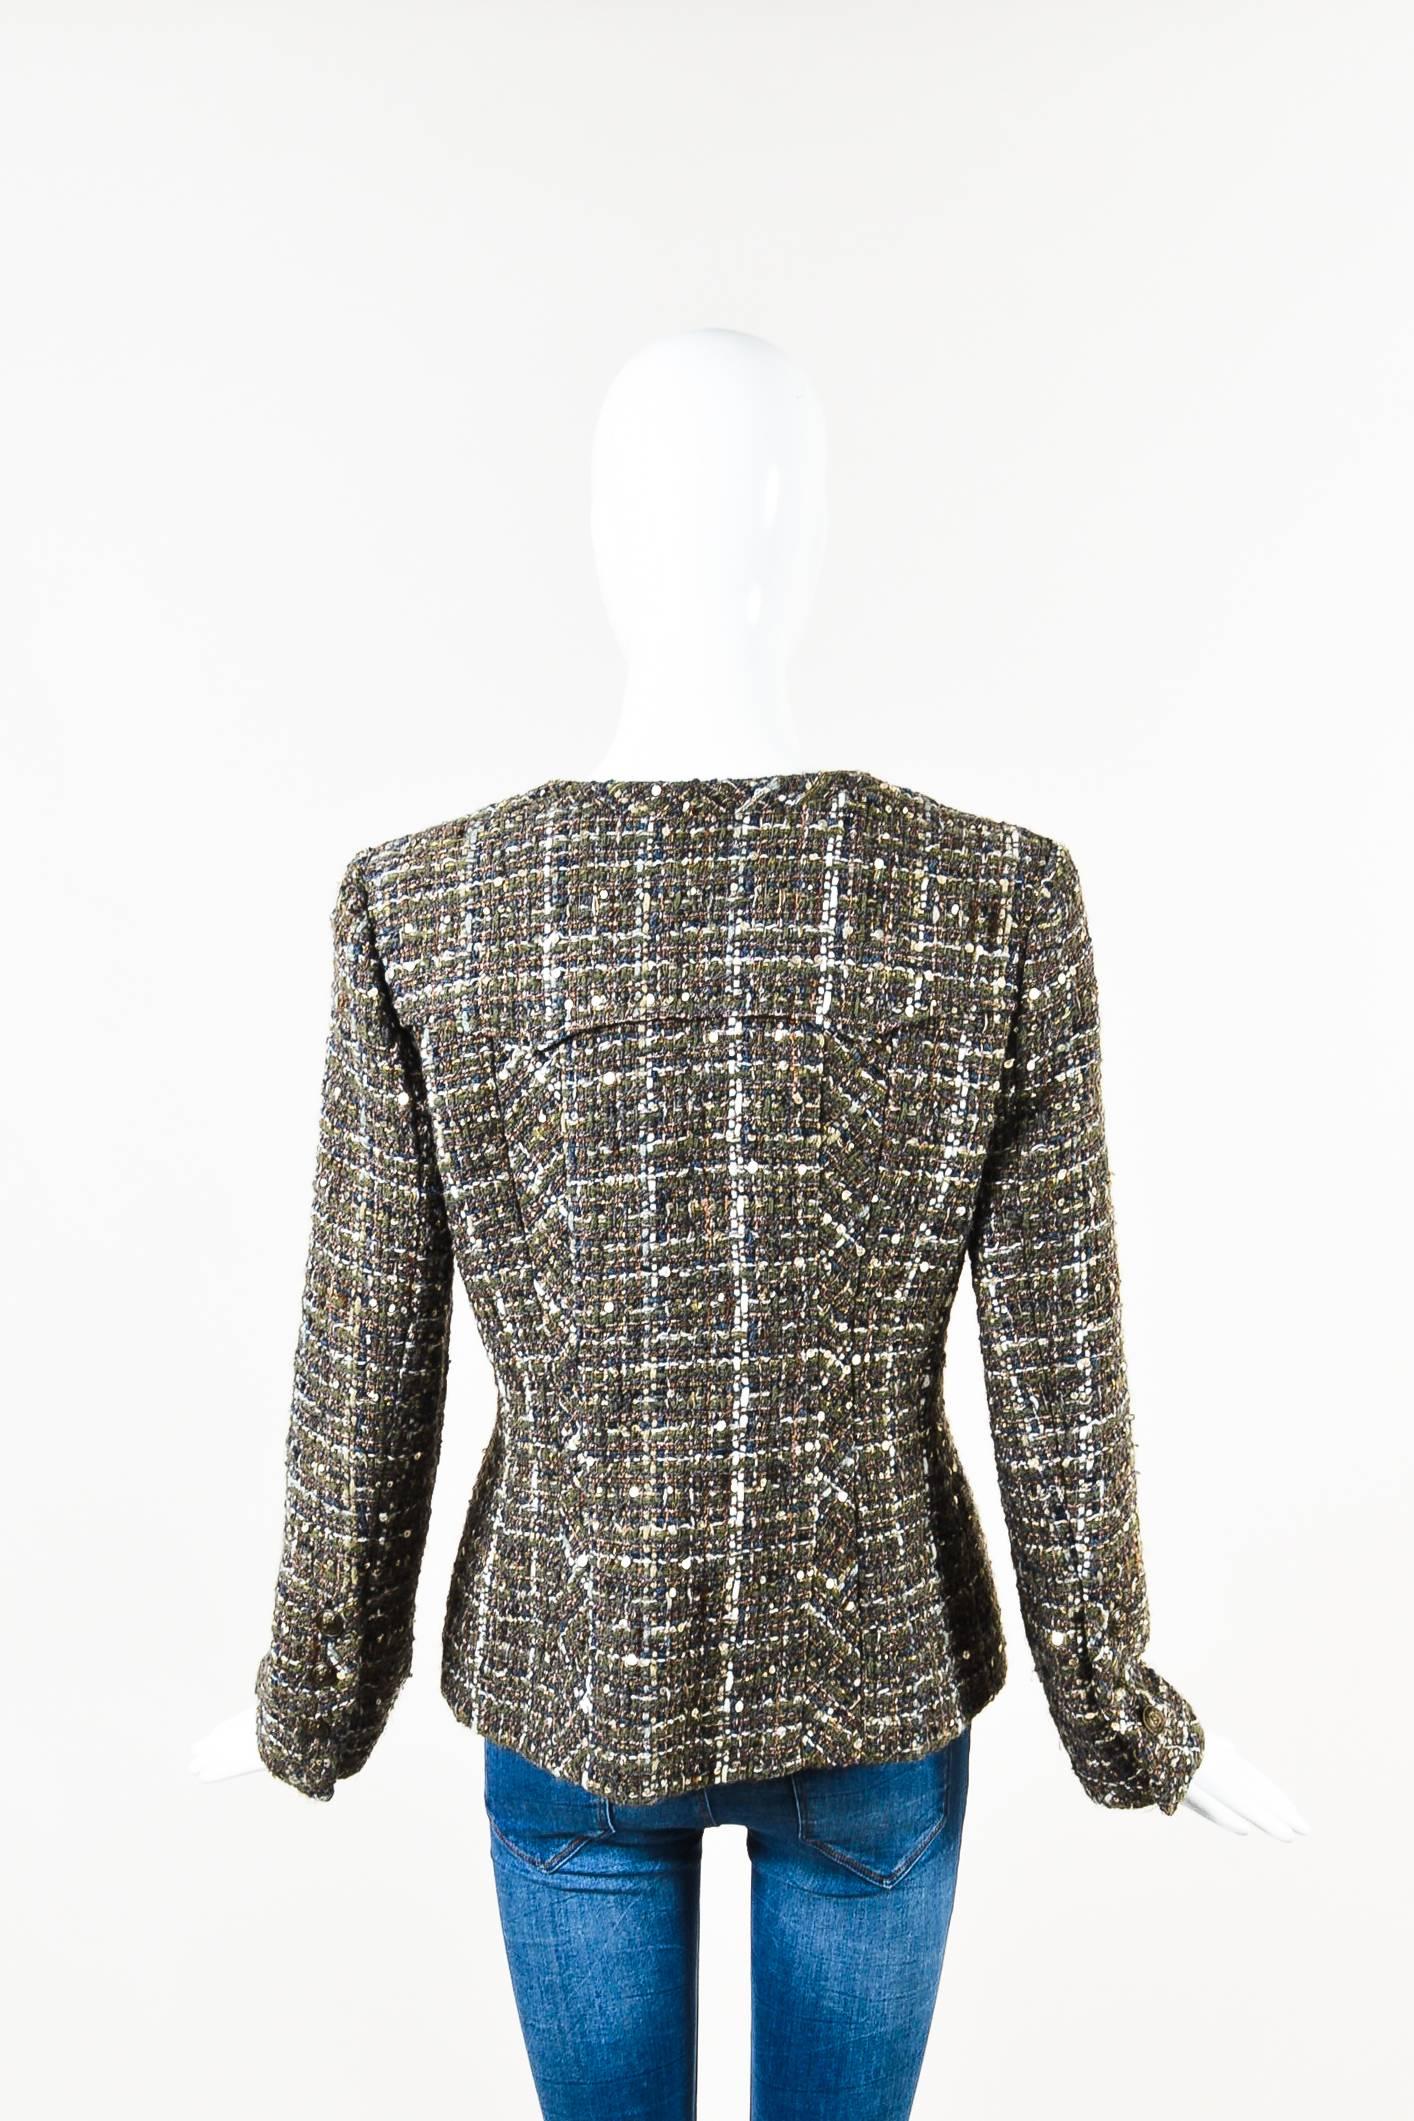 Olive green, brown, navy, white, and cream tweed open jacket from Chanel. Fabrication is unknown, but appears to be wool. Rounded neckline. Shoulder pads. Bronze tone decorative buttons. Two front faux flap pockets with button closures. Buttons on